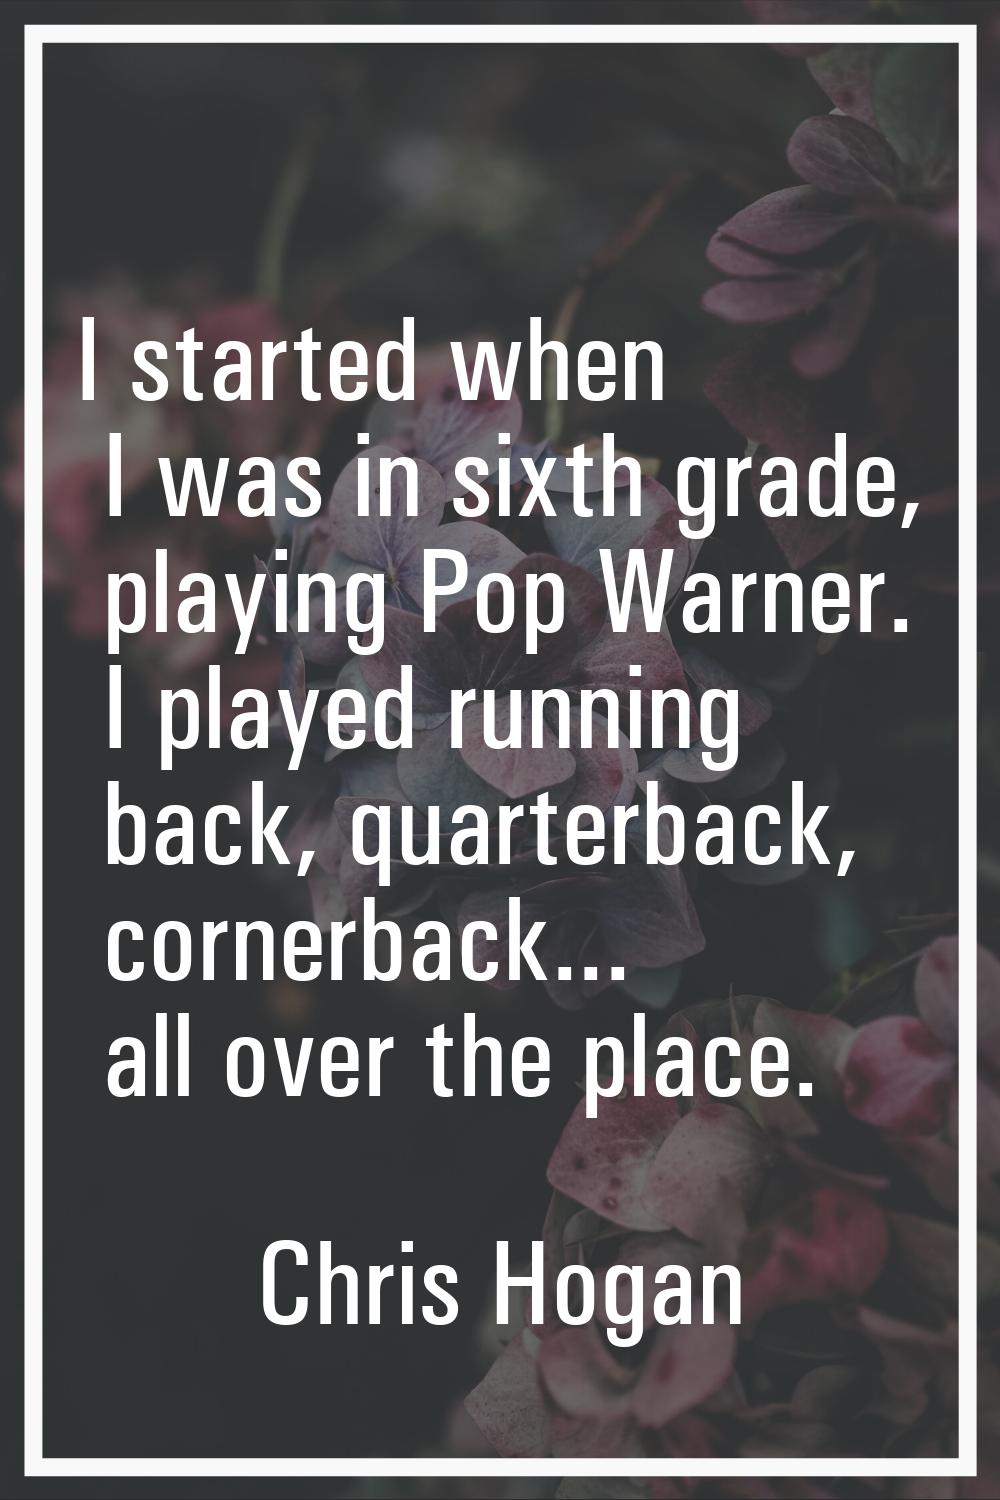 I started when I was in sixth grade, playing Pop Warner. I played running back, quarterback, corner